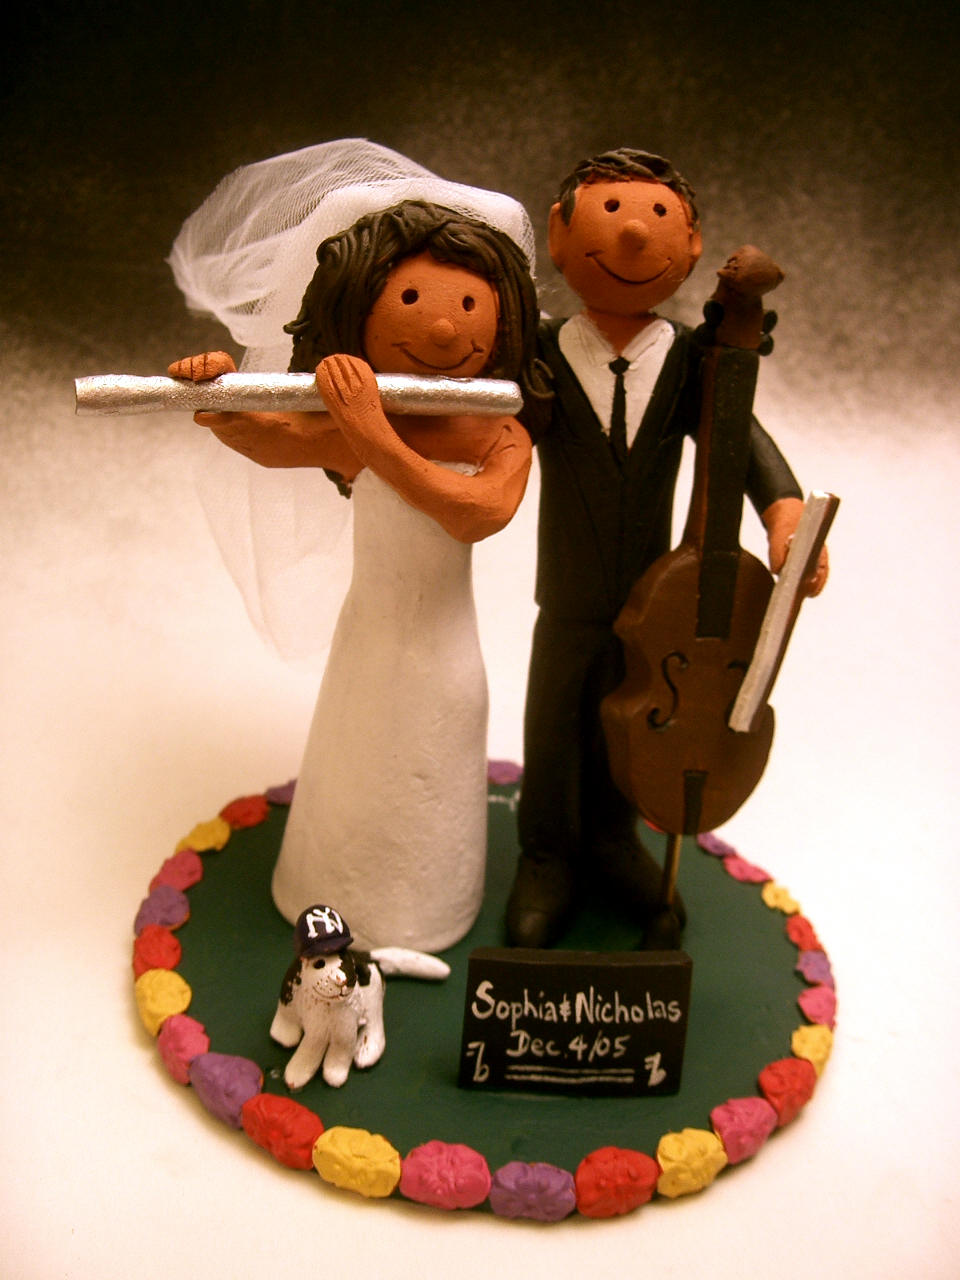 Cake Topper custom made for Musicians!...any instrument can be featured